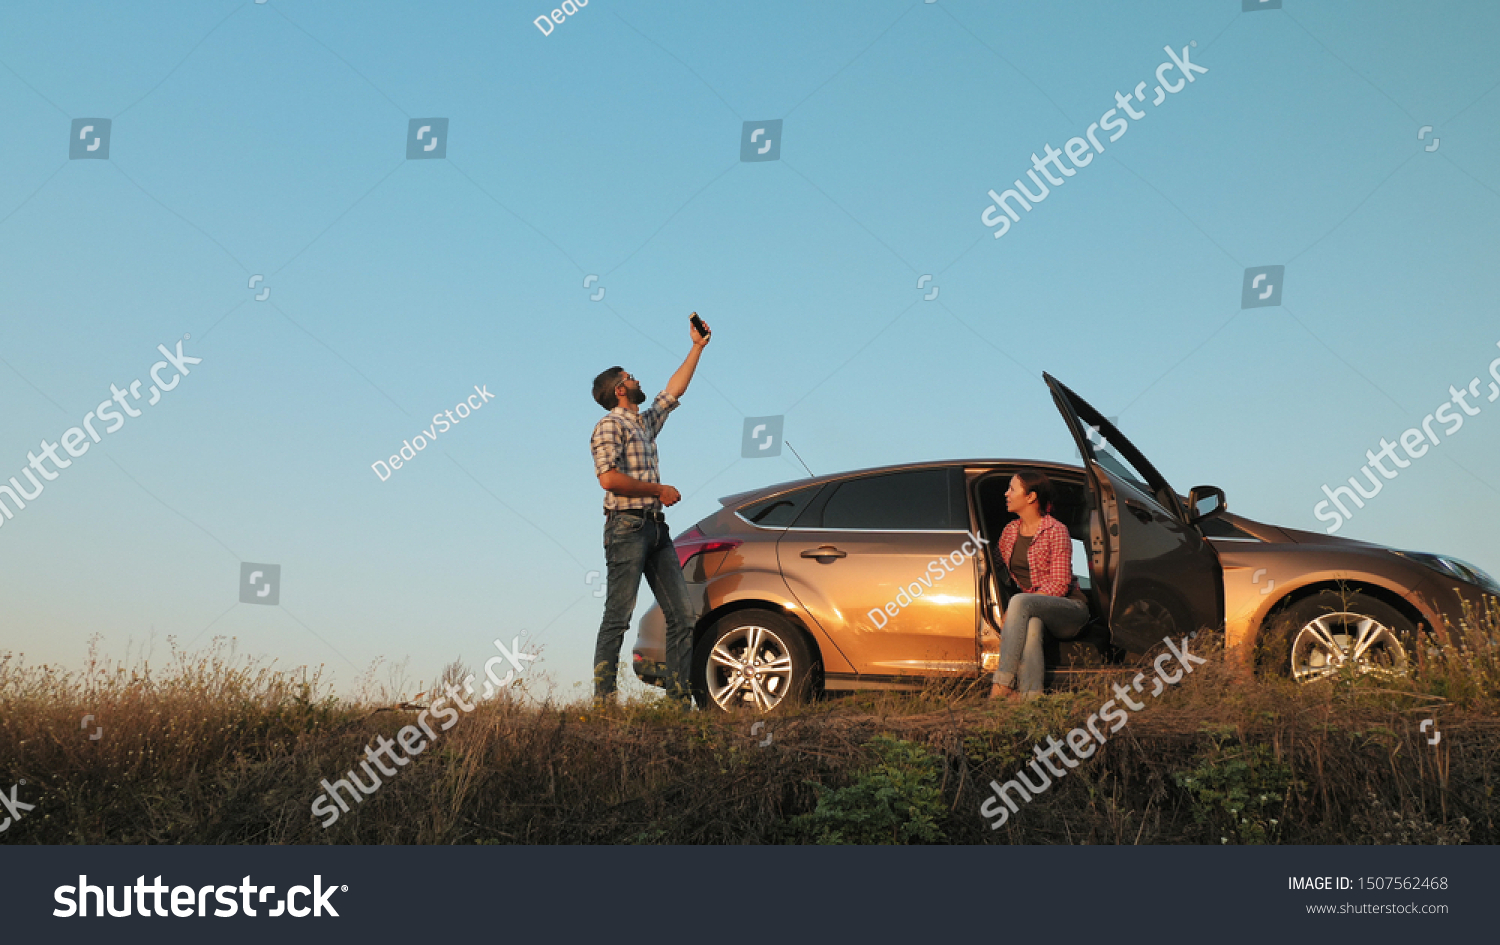 Man and woman traveling by car catches a phone signal while standing on the side of the road #1507562468